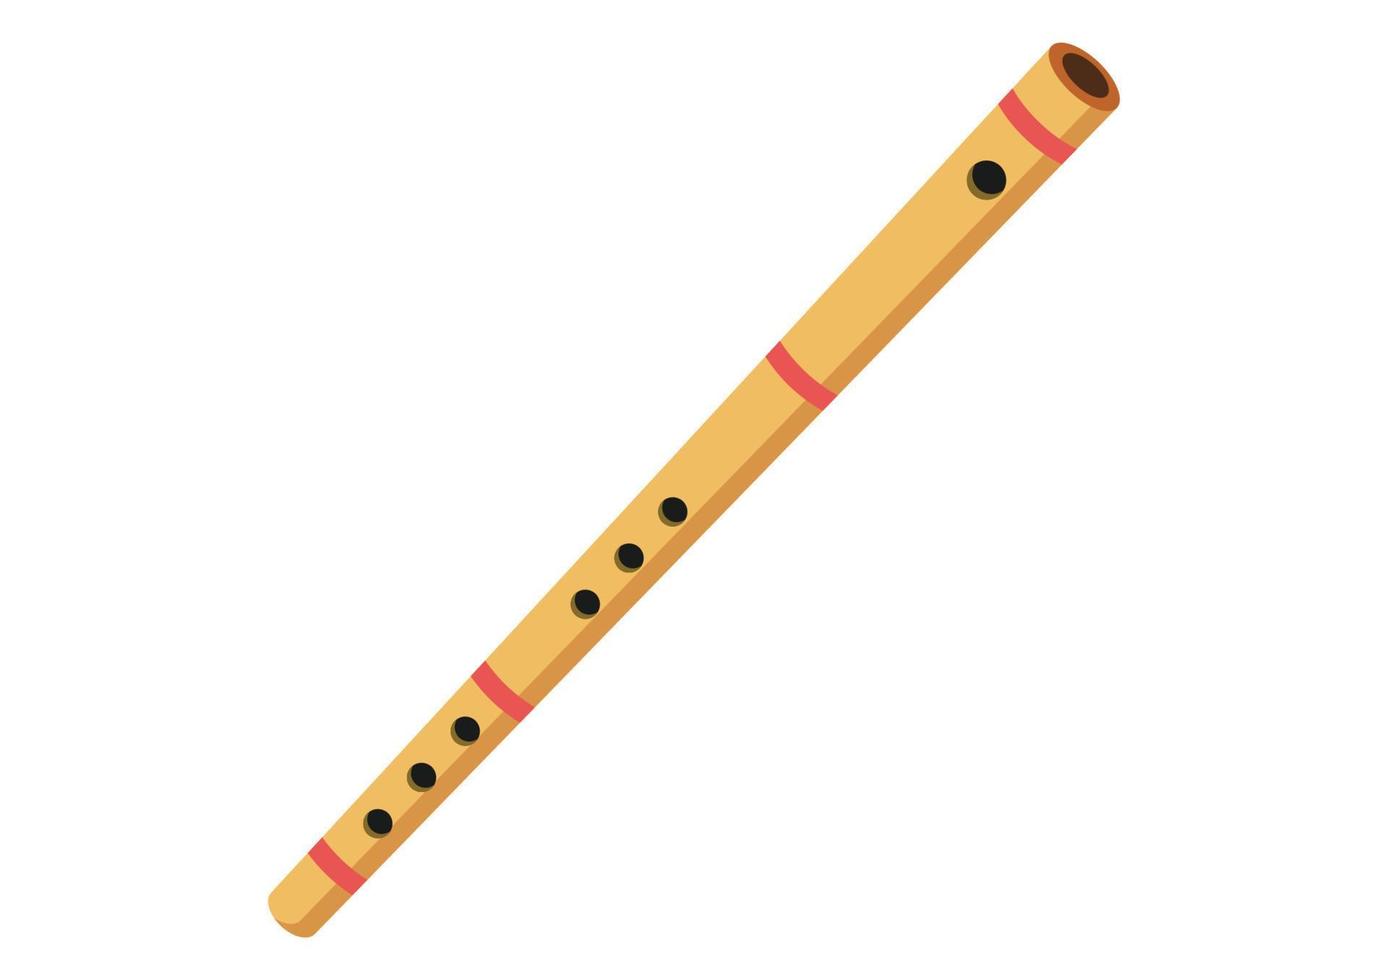 Bamboo flute vector design. Wooden flute flat style vector illustration isolated on white background. Vintage classical musical instruments concept. Flute clipart.